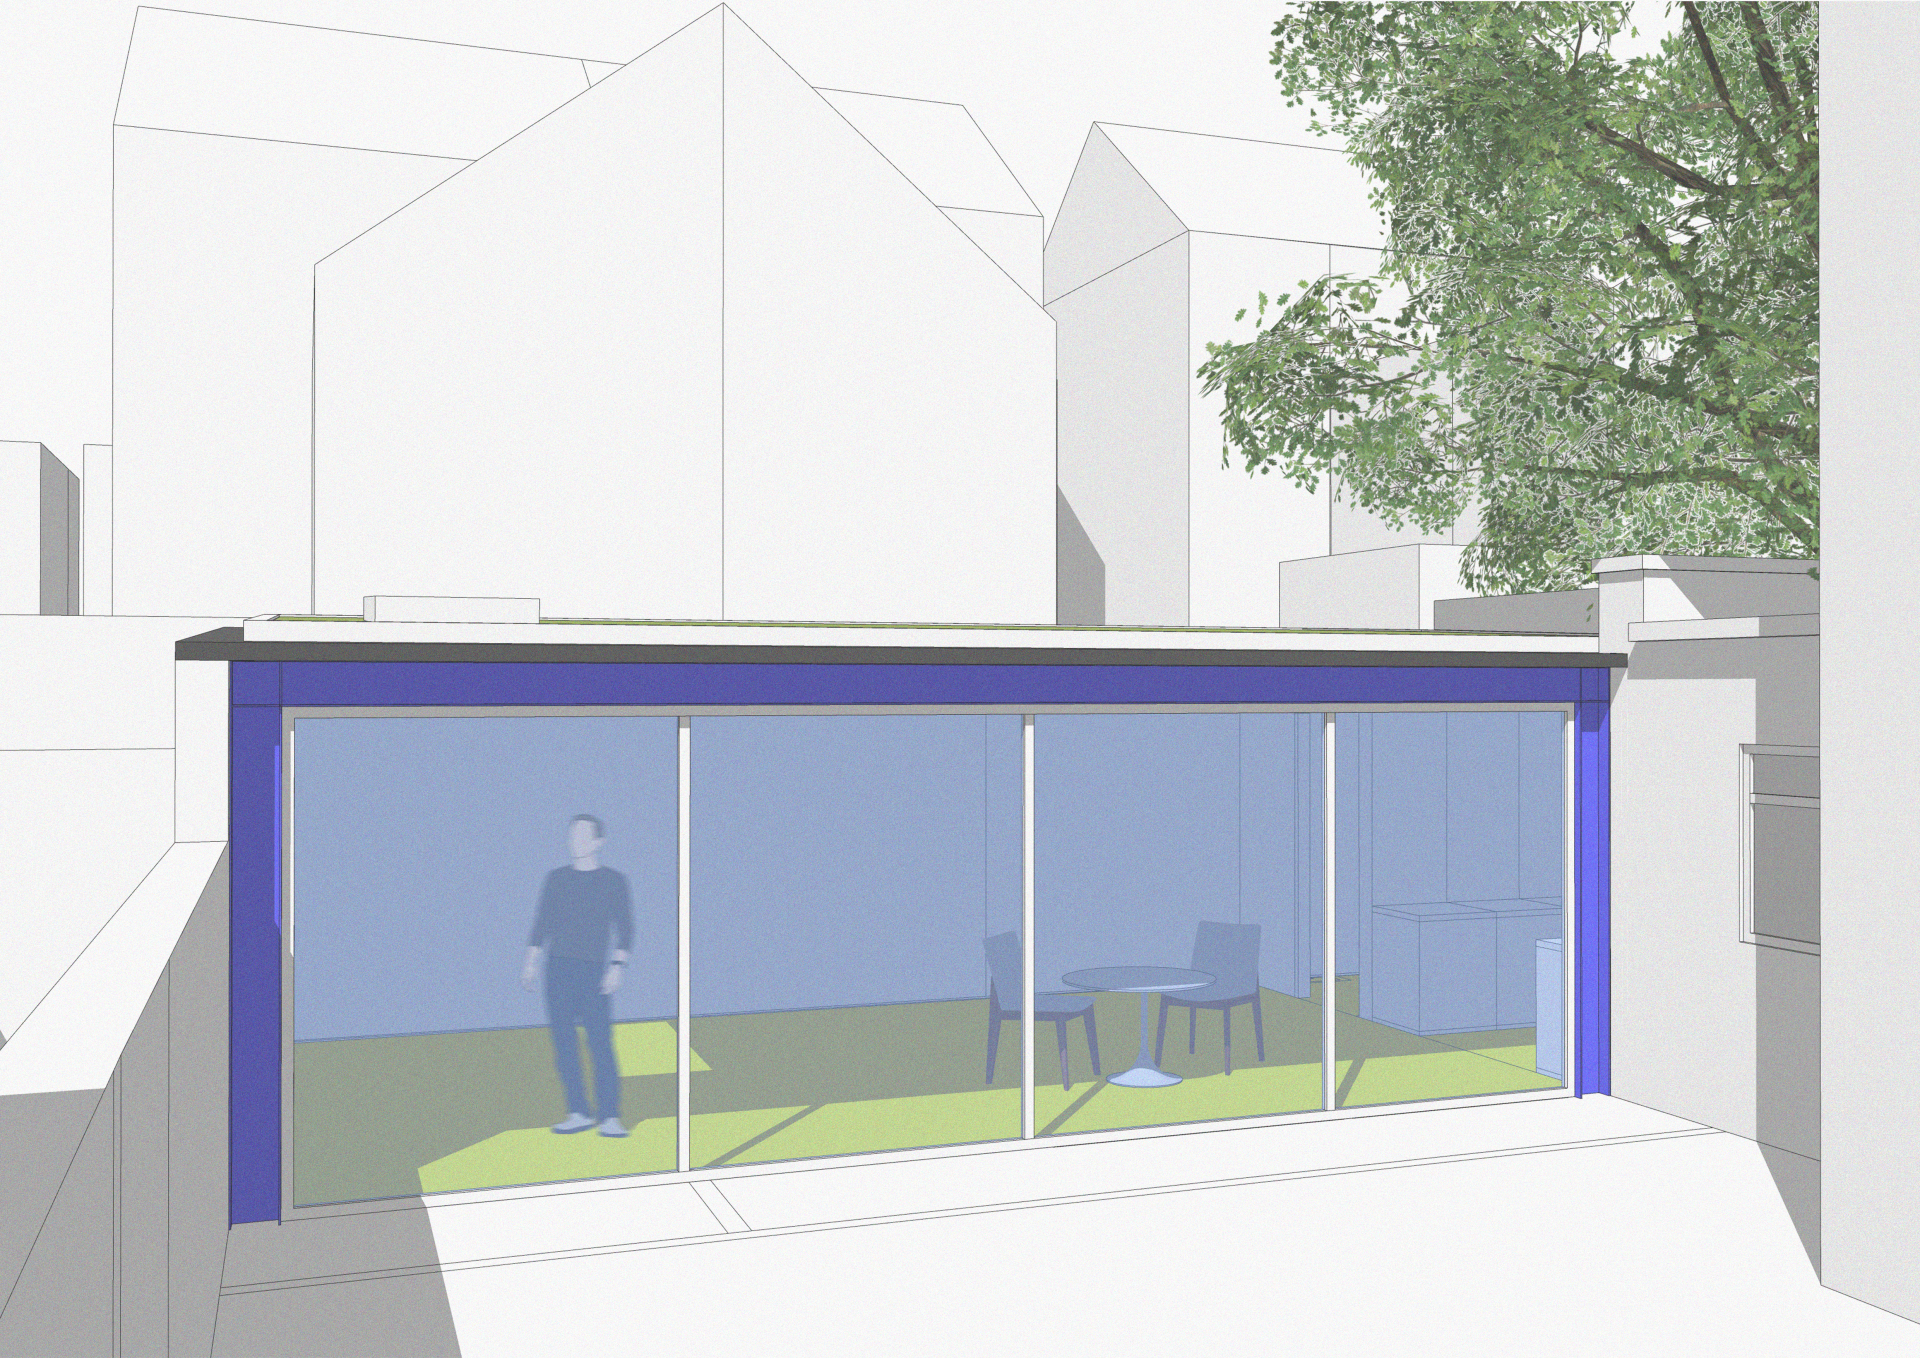 An image showing a 3D model of a studio project in Hove